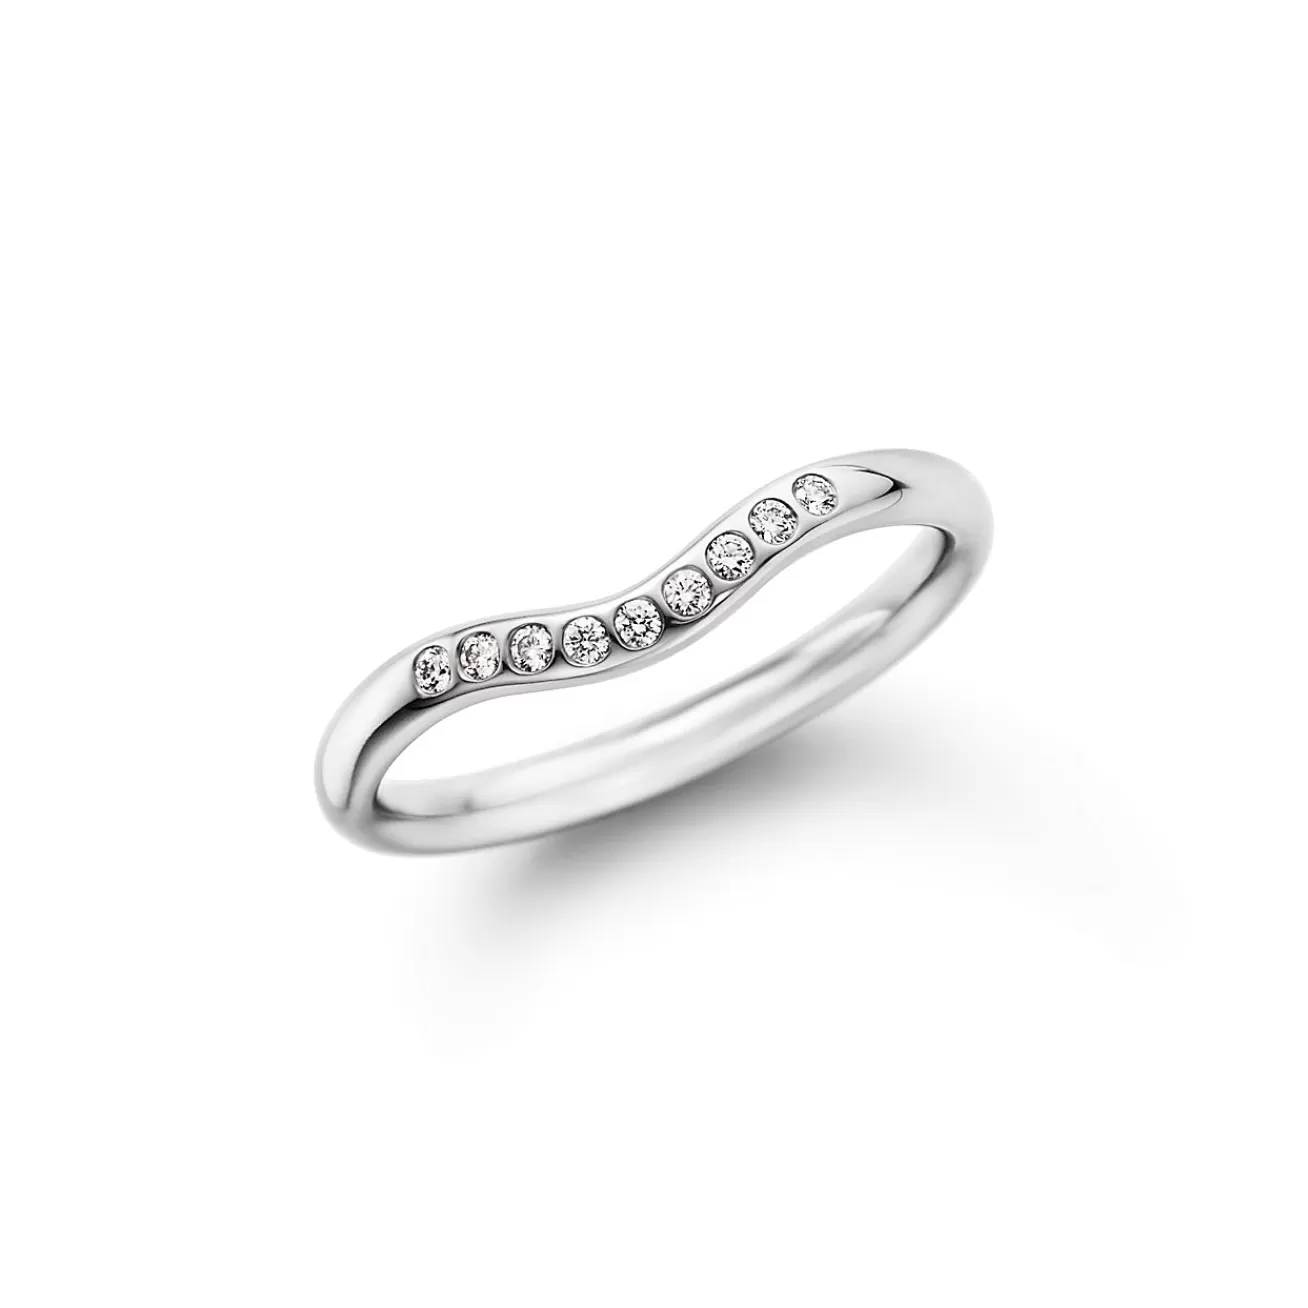 Tiffany & Co. Elsa Peretti® wedding band ring with diamonds in platinum. | ^ Rings | Stacking Rings